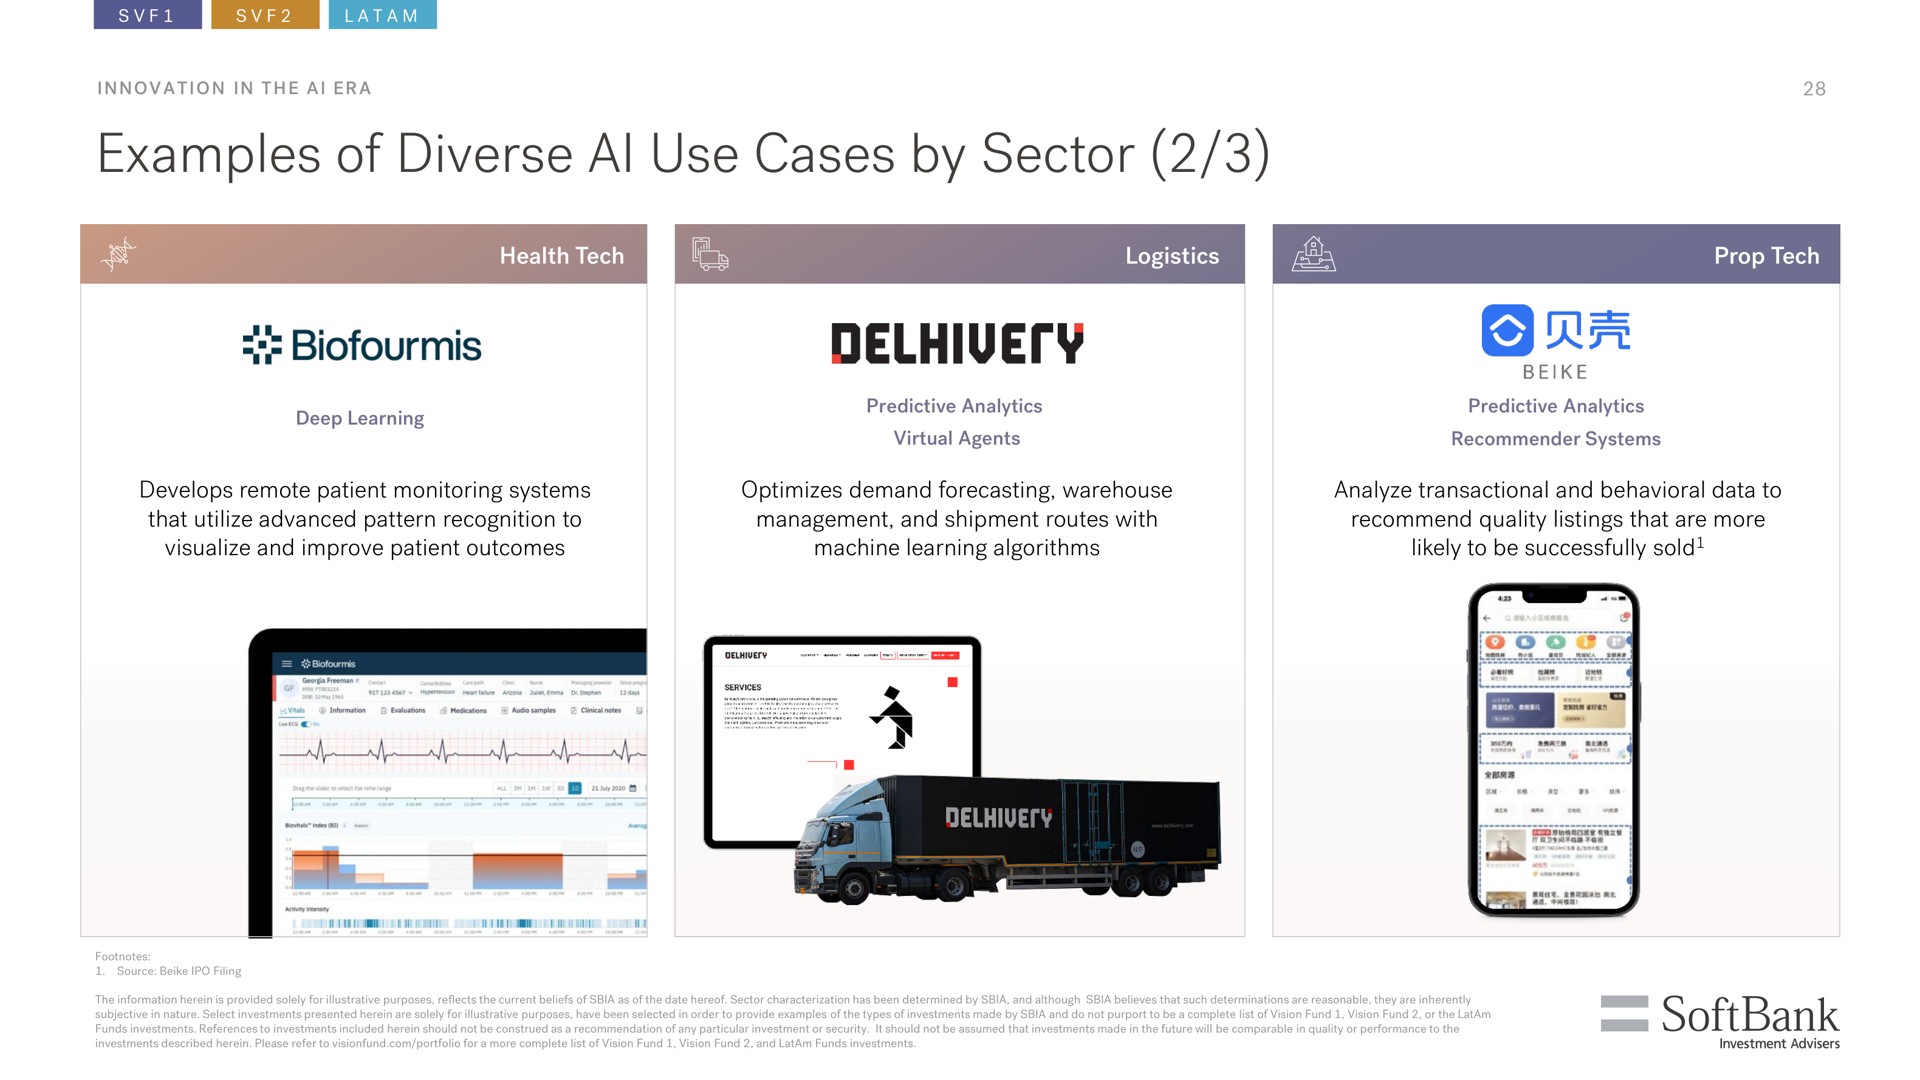 examples of diverse use cases by sector a reem tea fas i seep ere | SoftBank